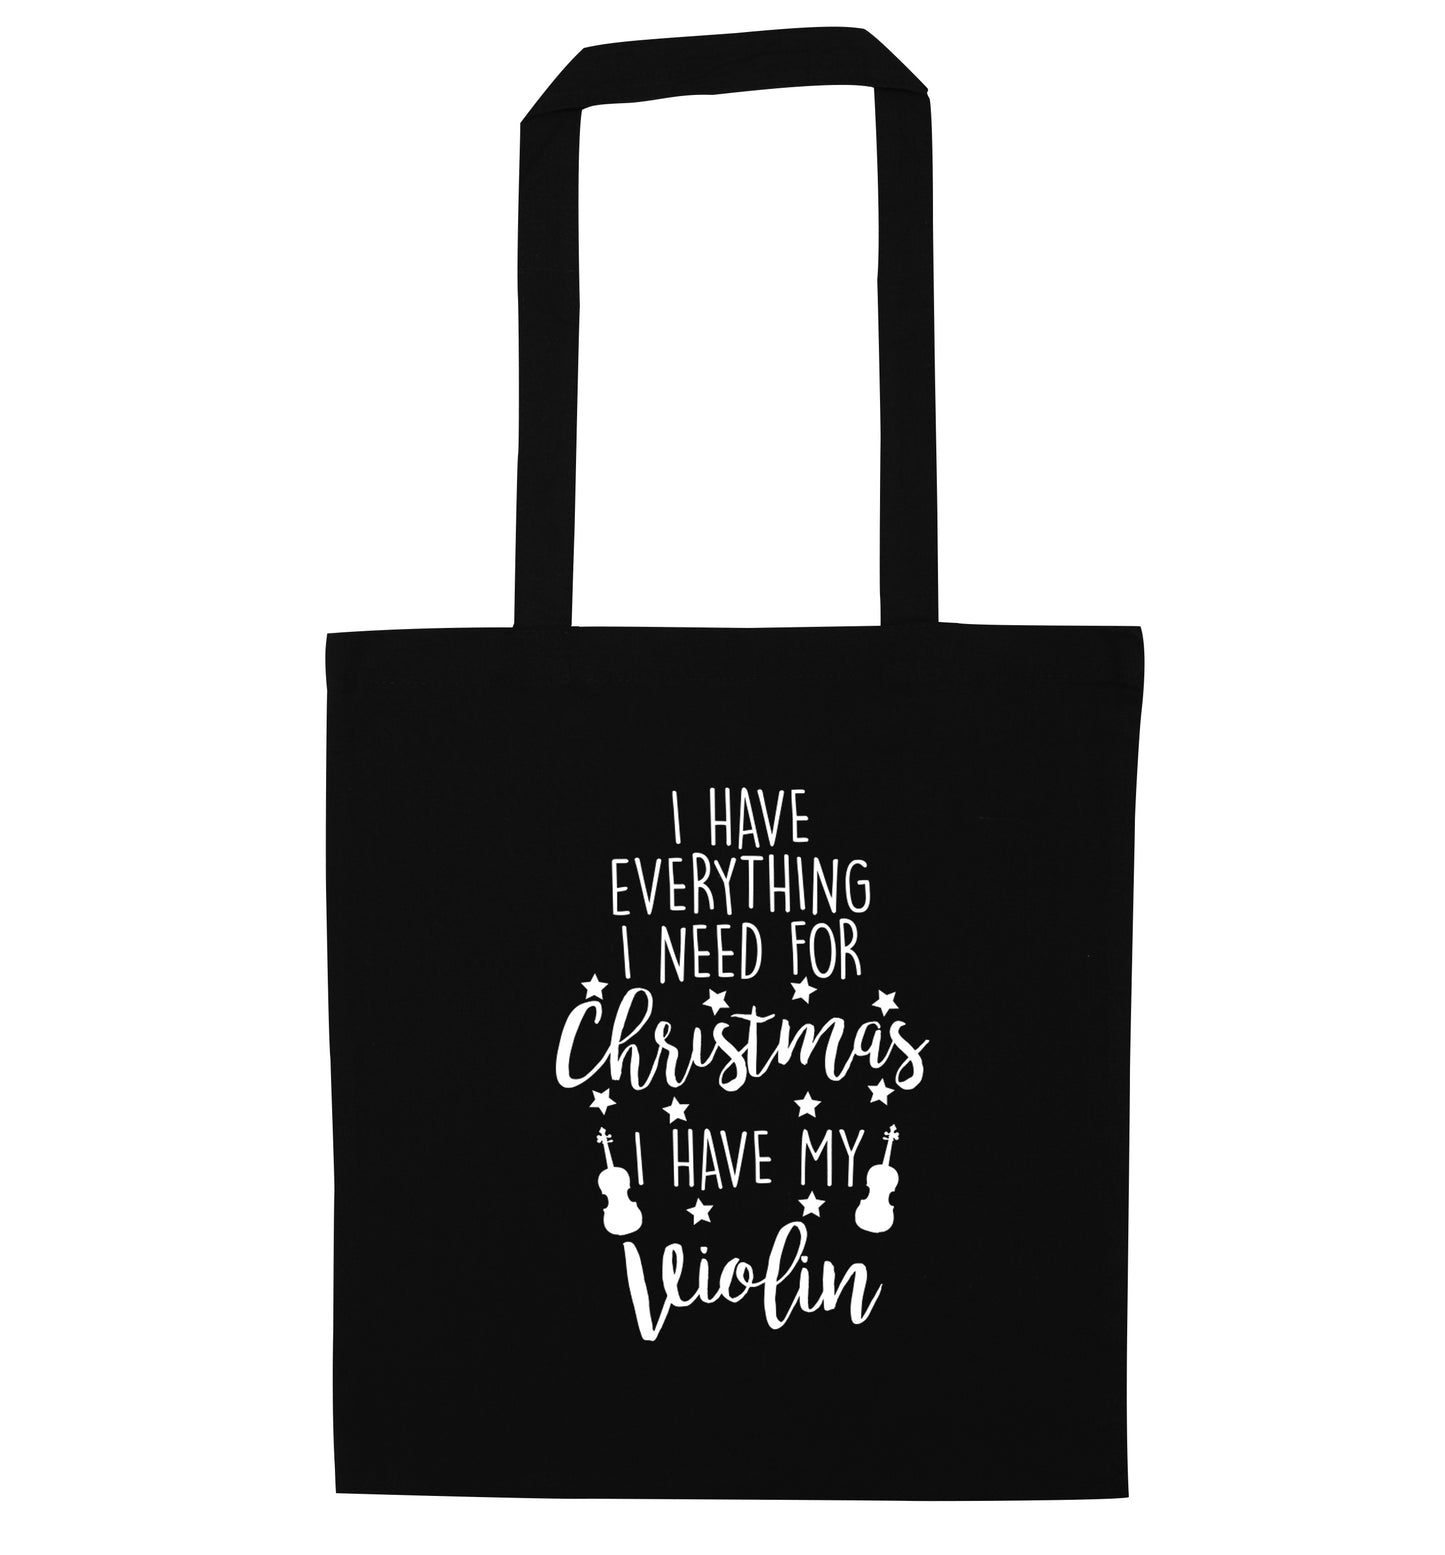 I have everything I need for Christmas I have my violin black tote bag